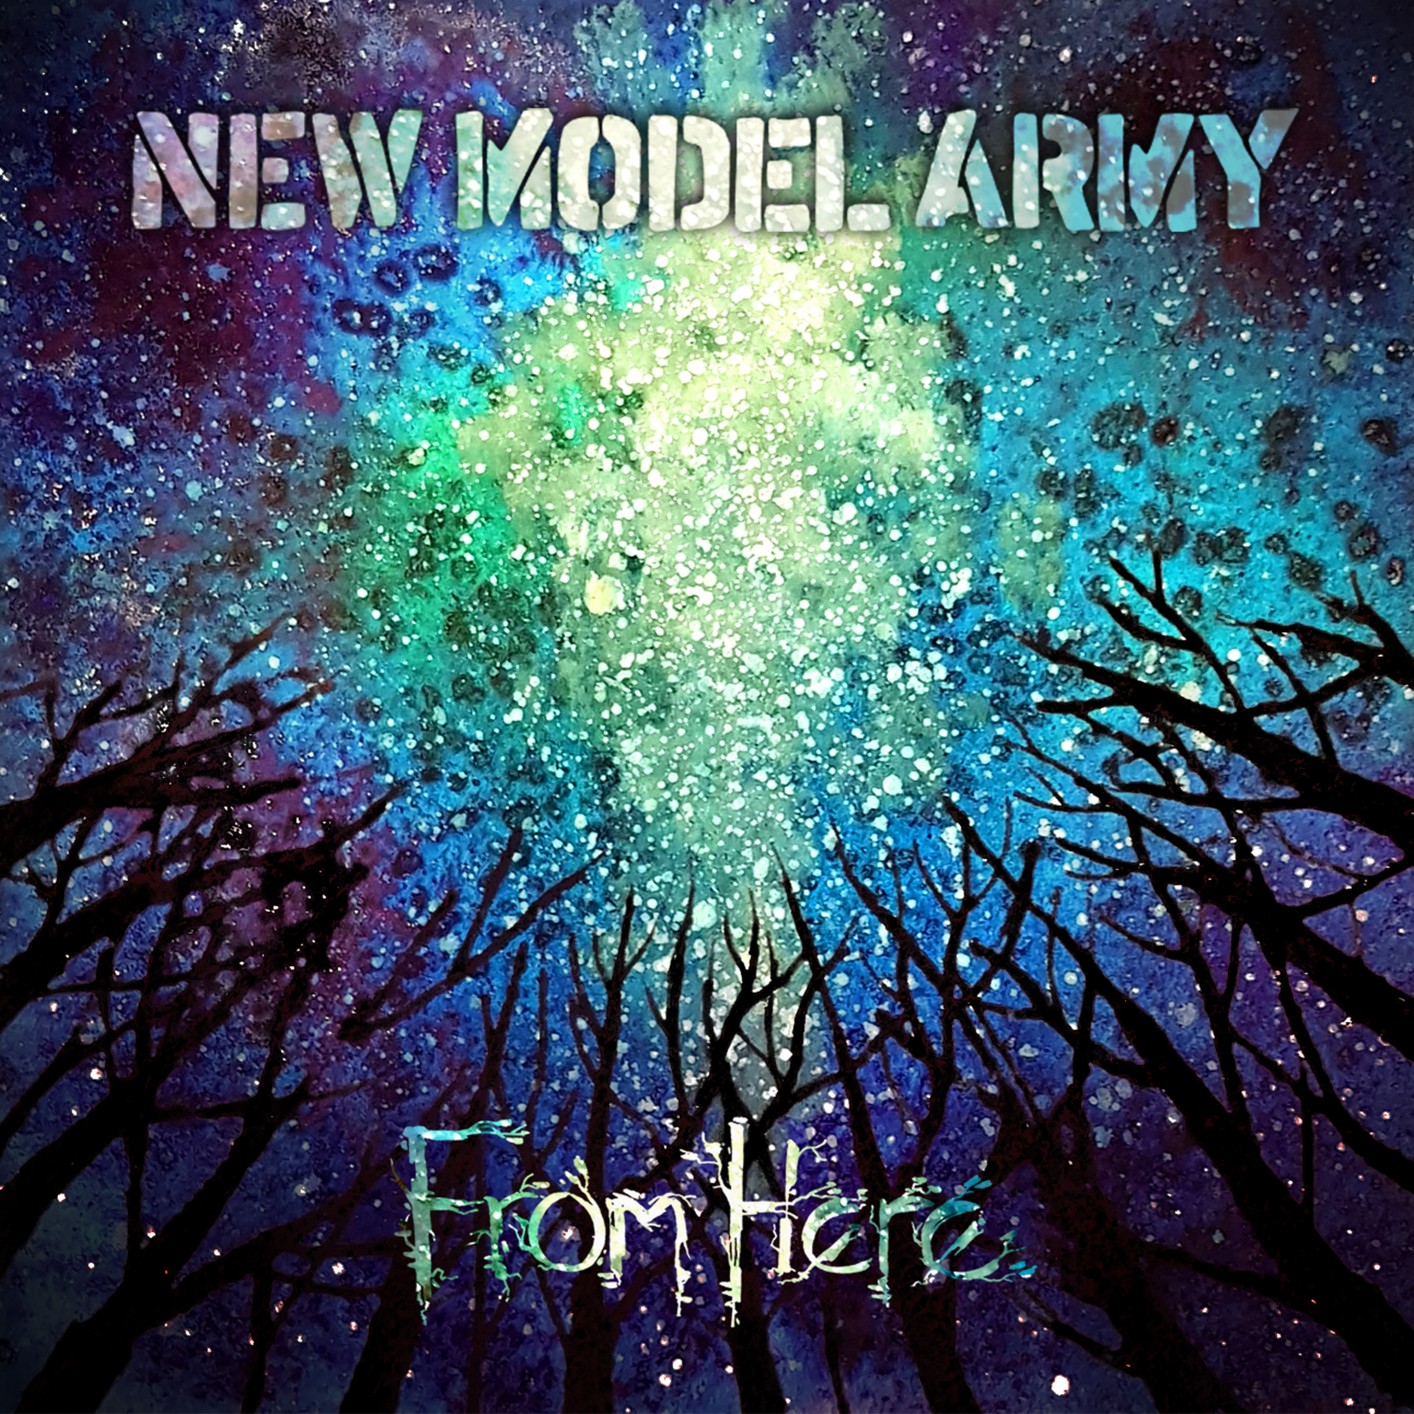 New Model Army - From Here (2019) [FLAC 24bit/48kHz]